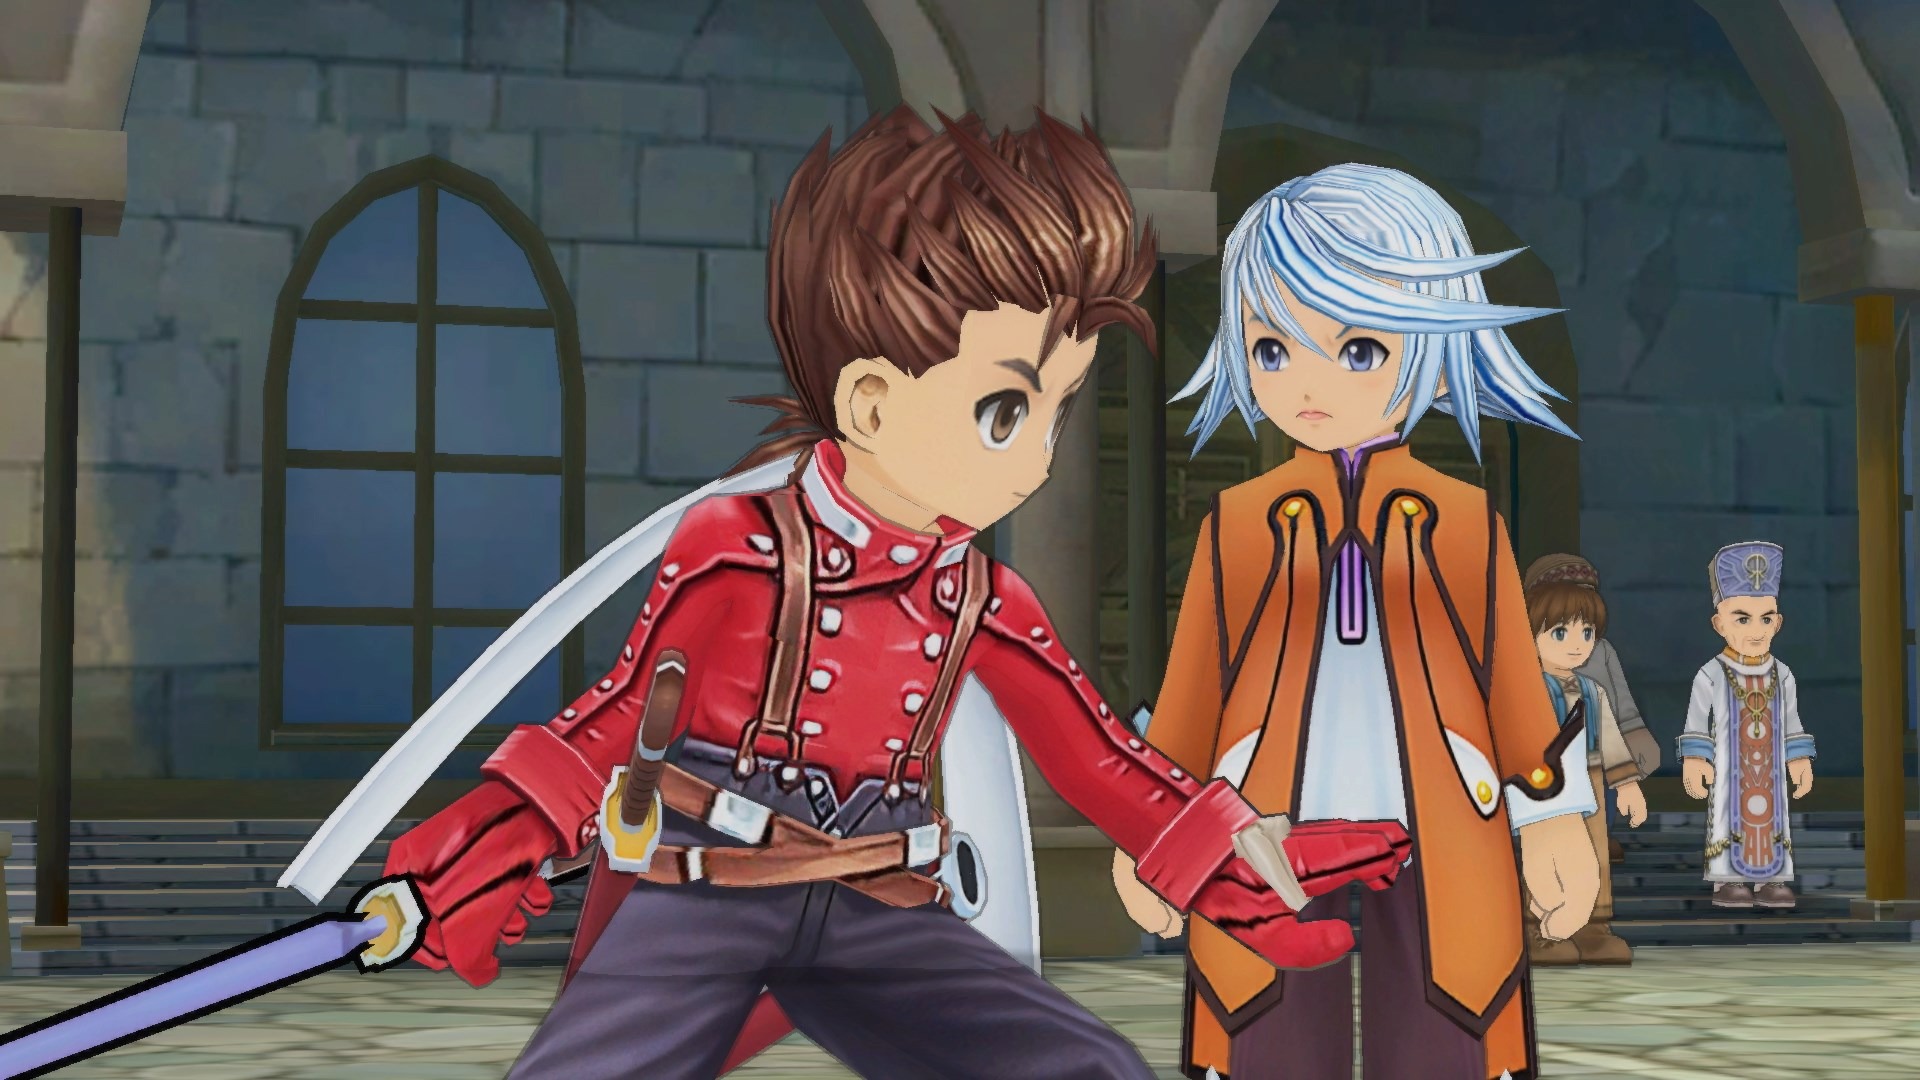 tales of symphonia remastered